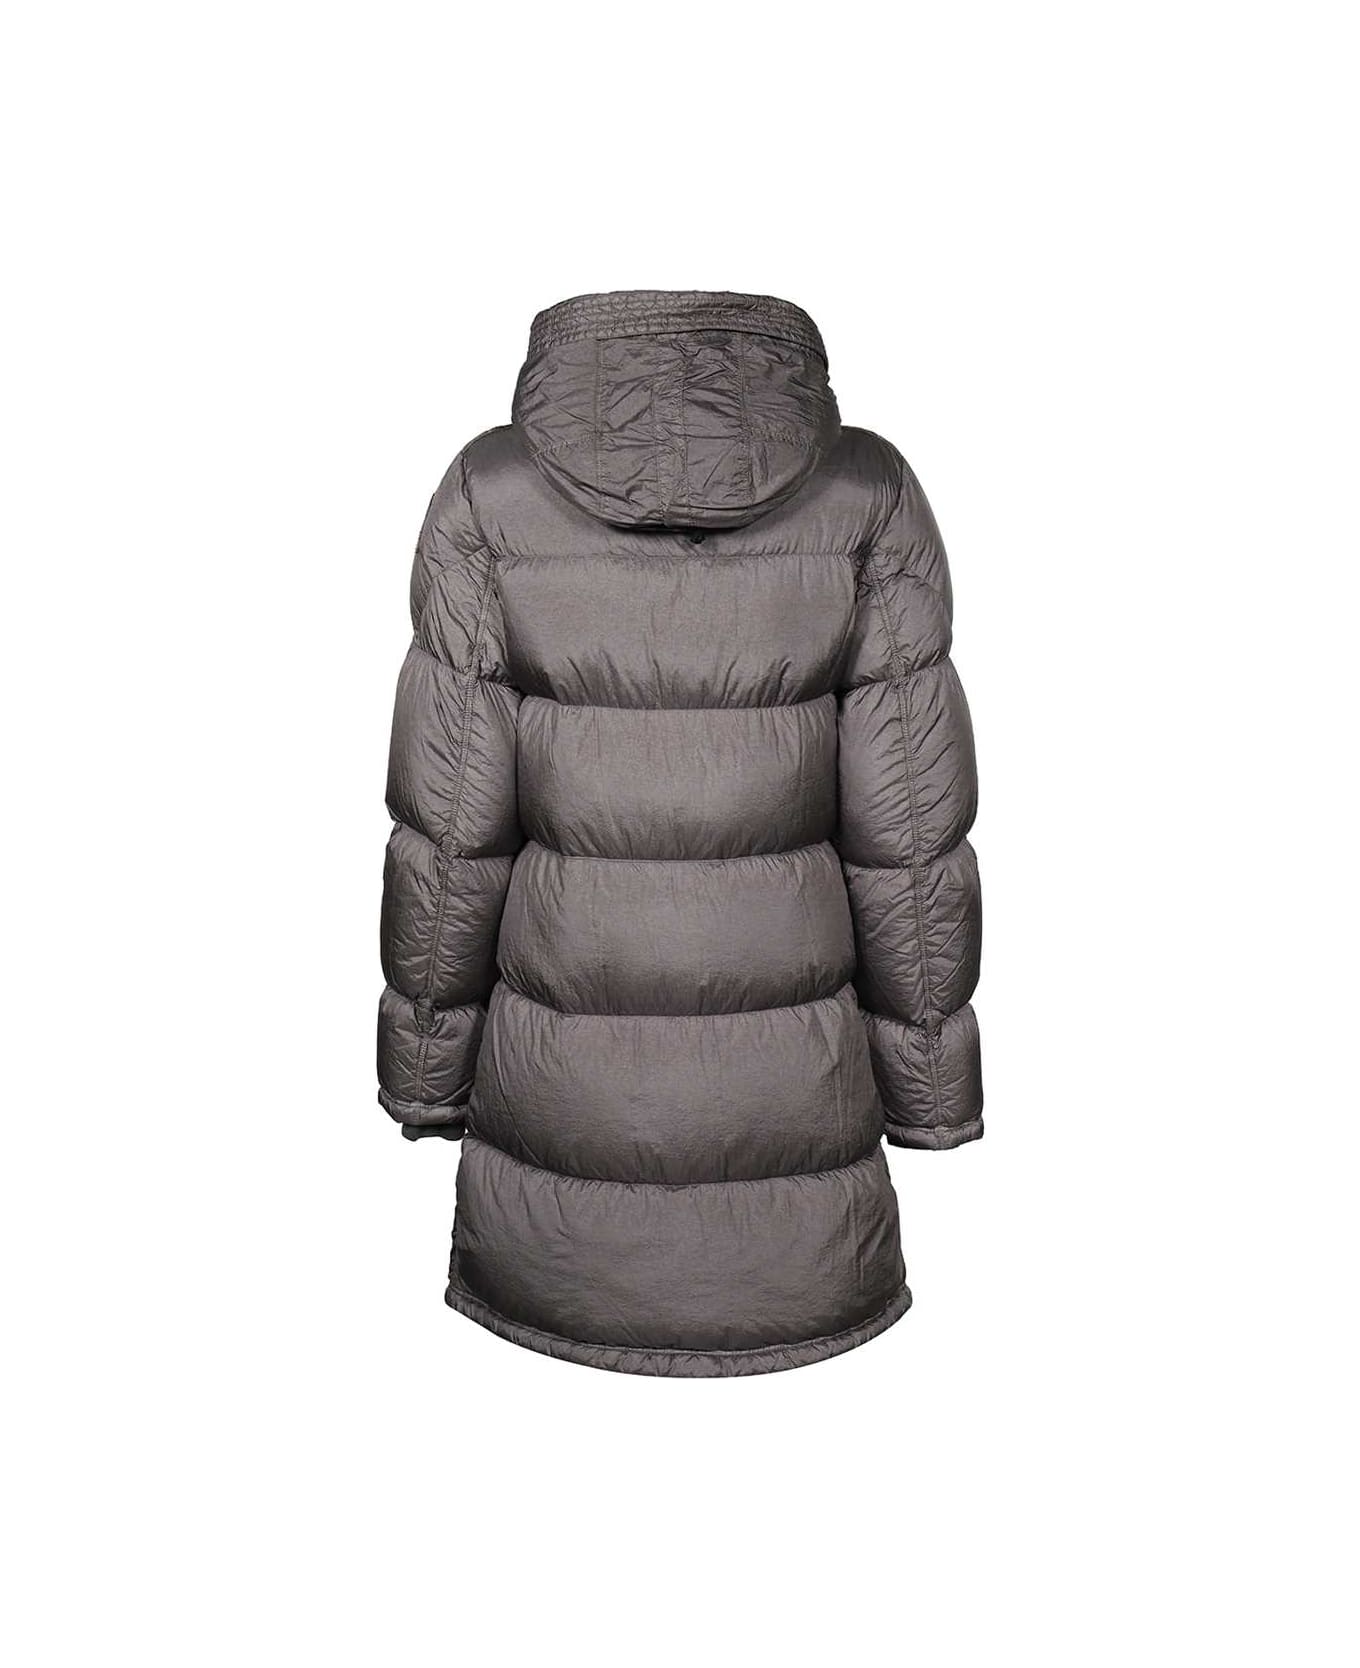 Parajumpers Angelica Long Hooded Down Jacket - grey